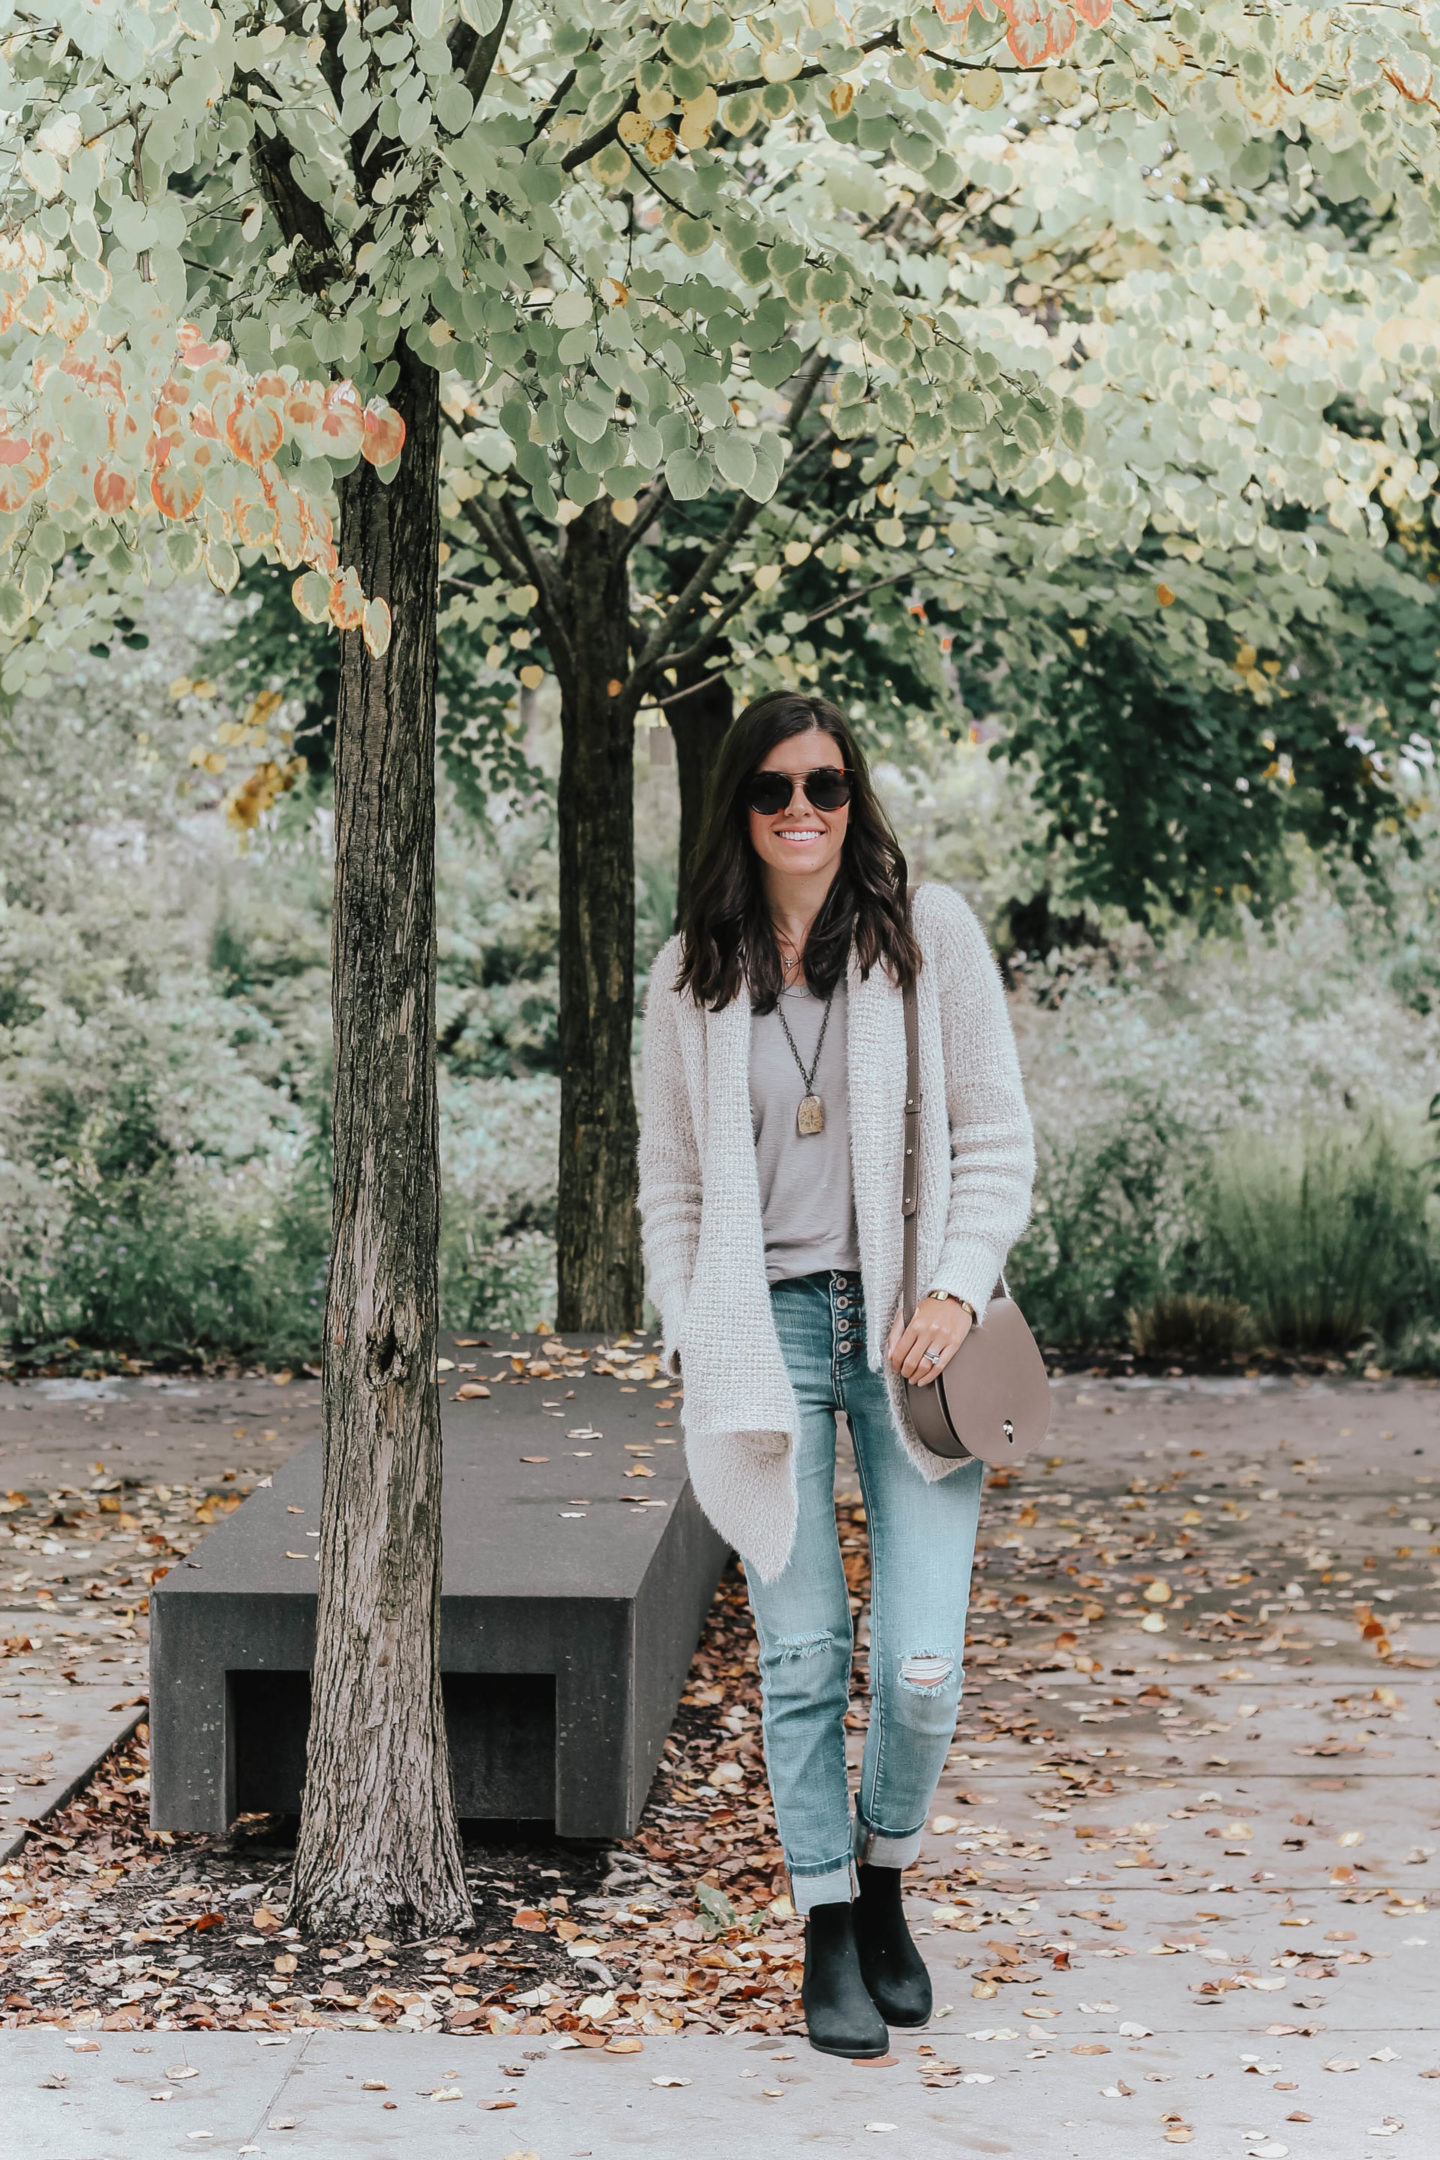 Styling Gray Tones For Fall With The Vici Boutique